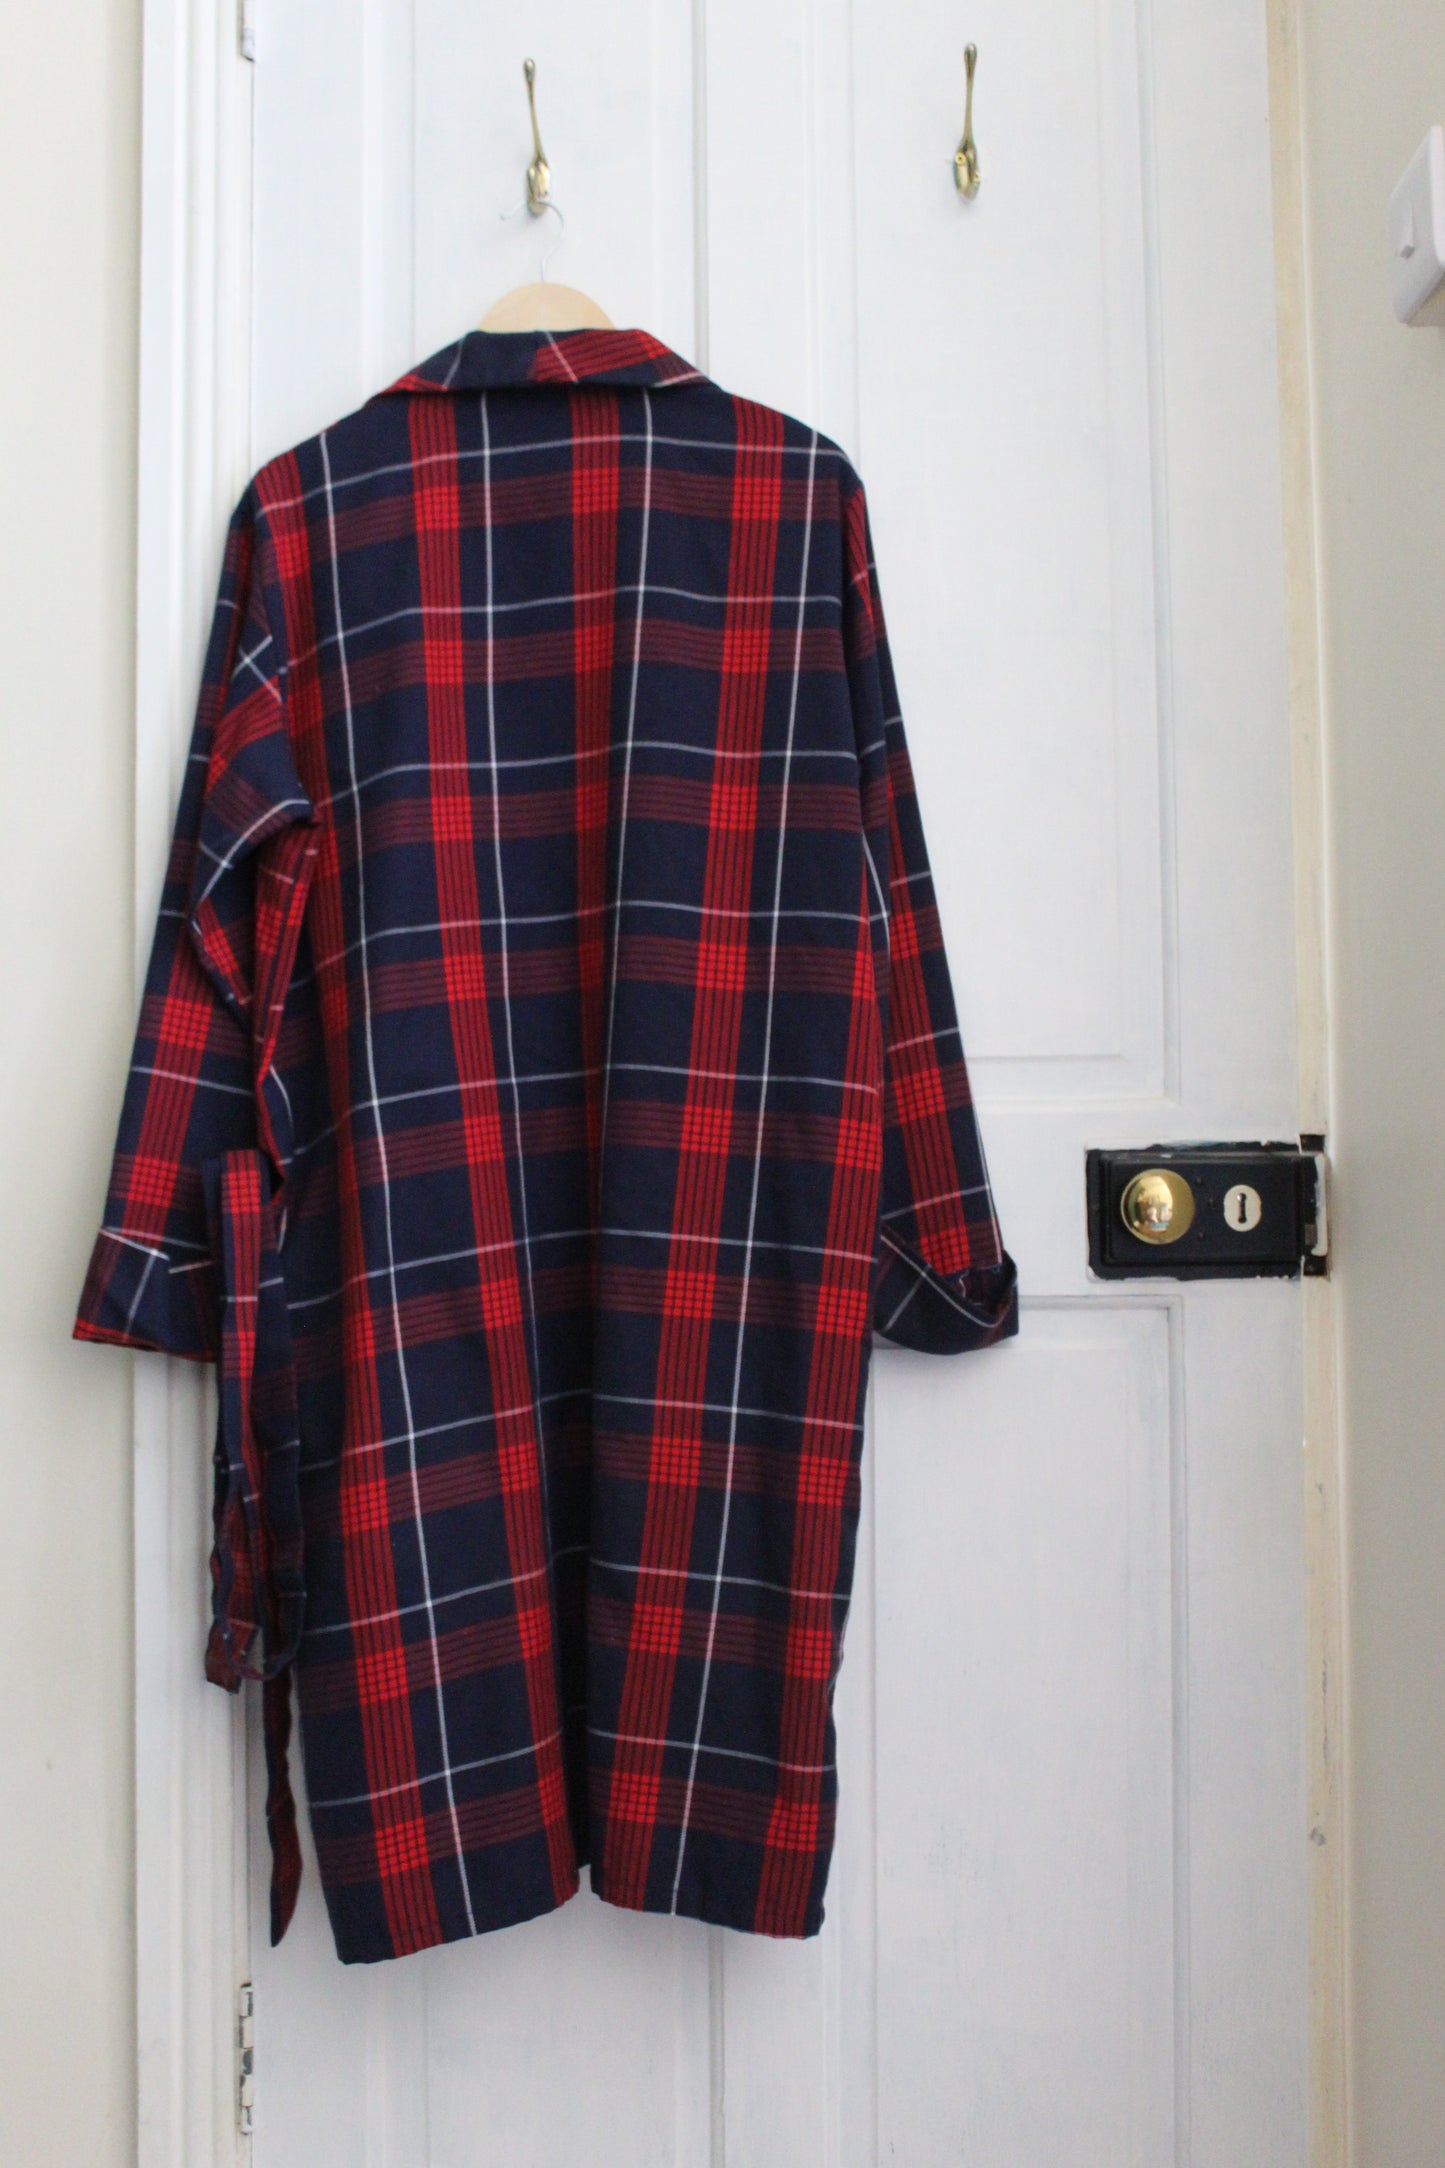 Navy and red check robe